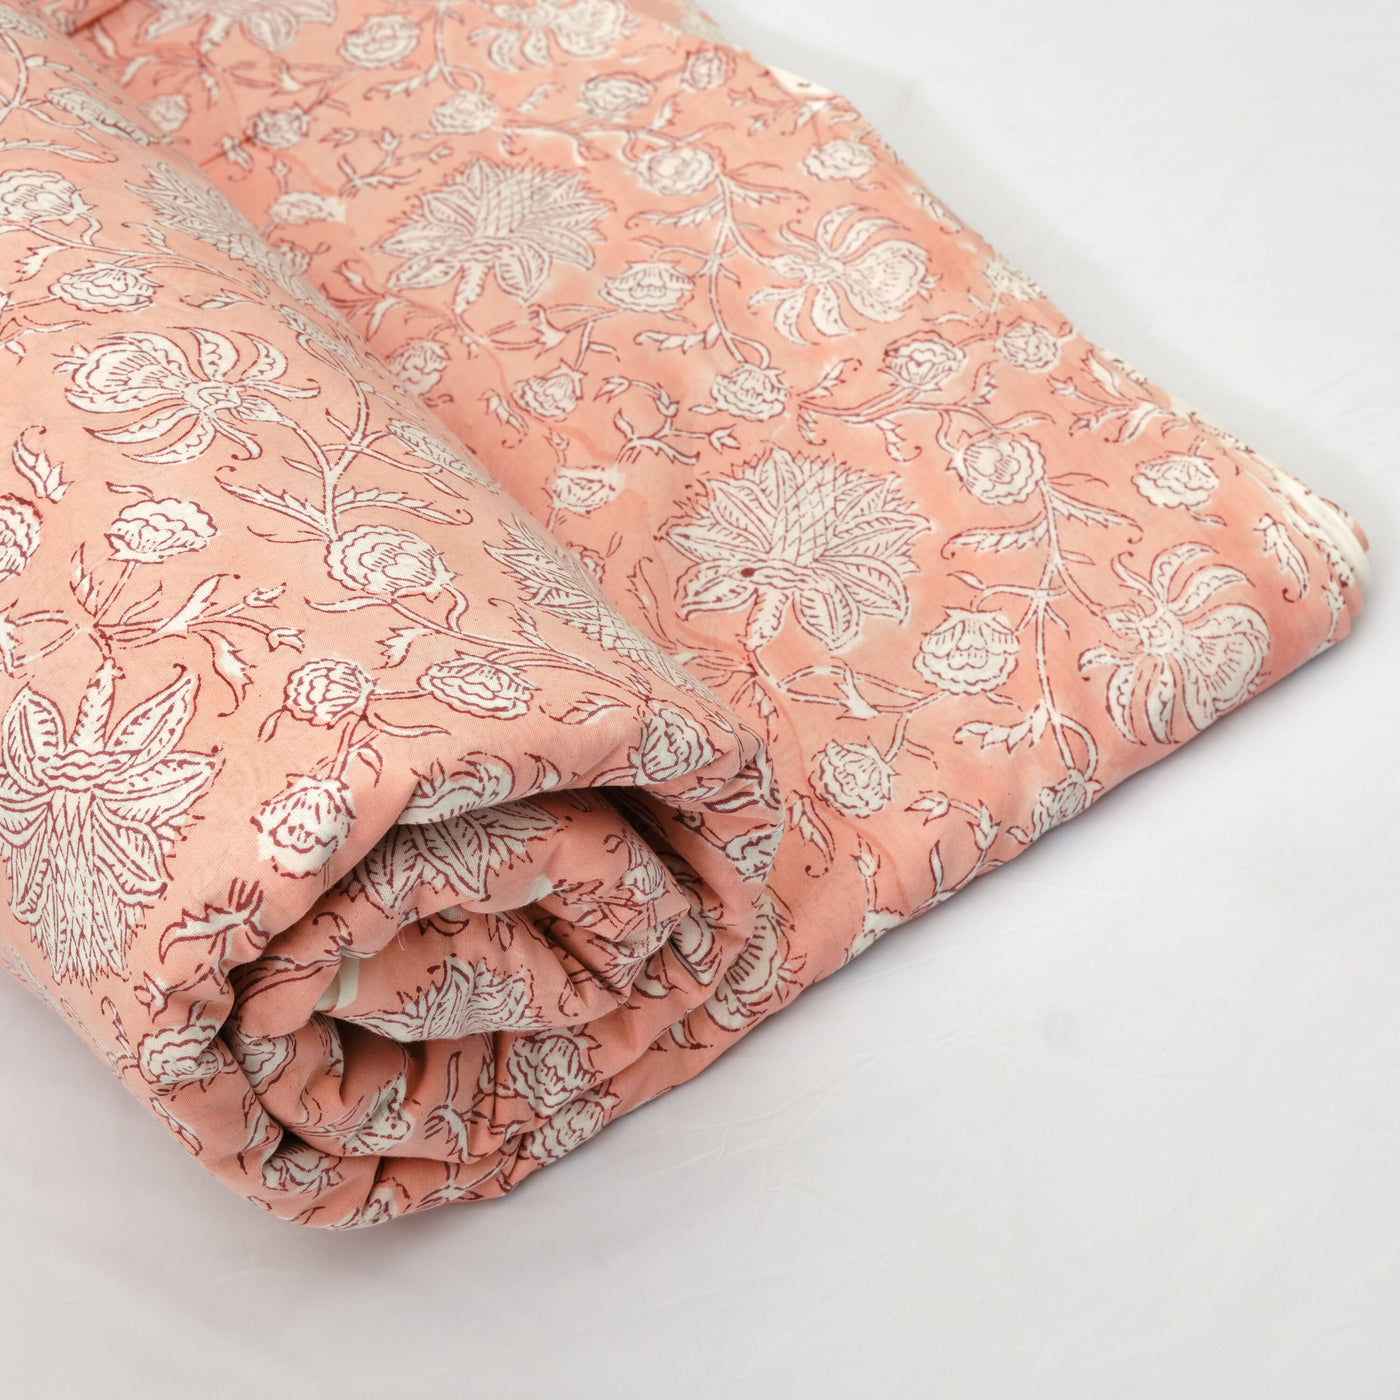 Fabricrush Salmon Pink & Off White Indian Floral Hand Block Printed 100% Pure Cotton Cloth, Fabric by the yard, Women's Clothing Curtains Pillows Bags